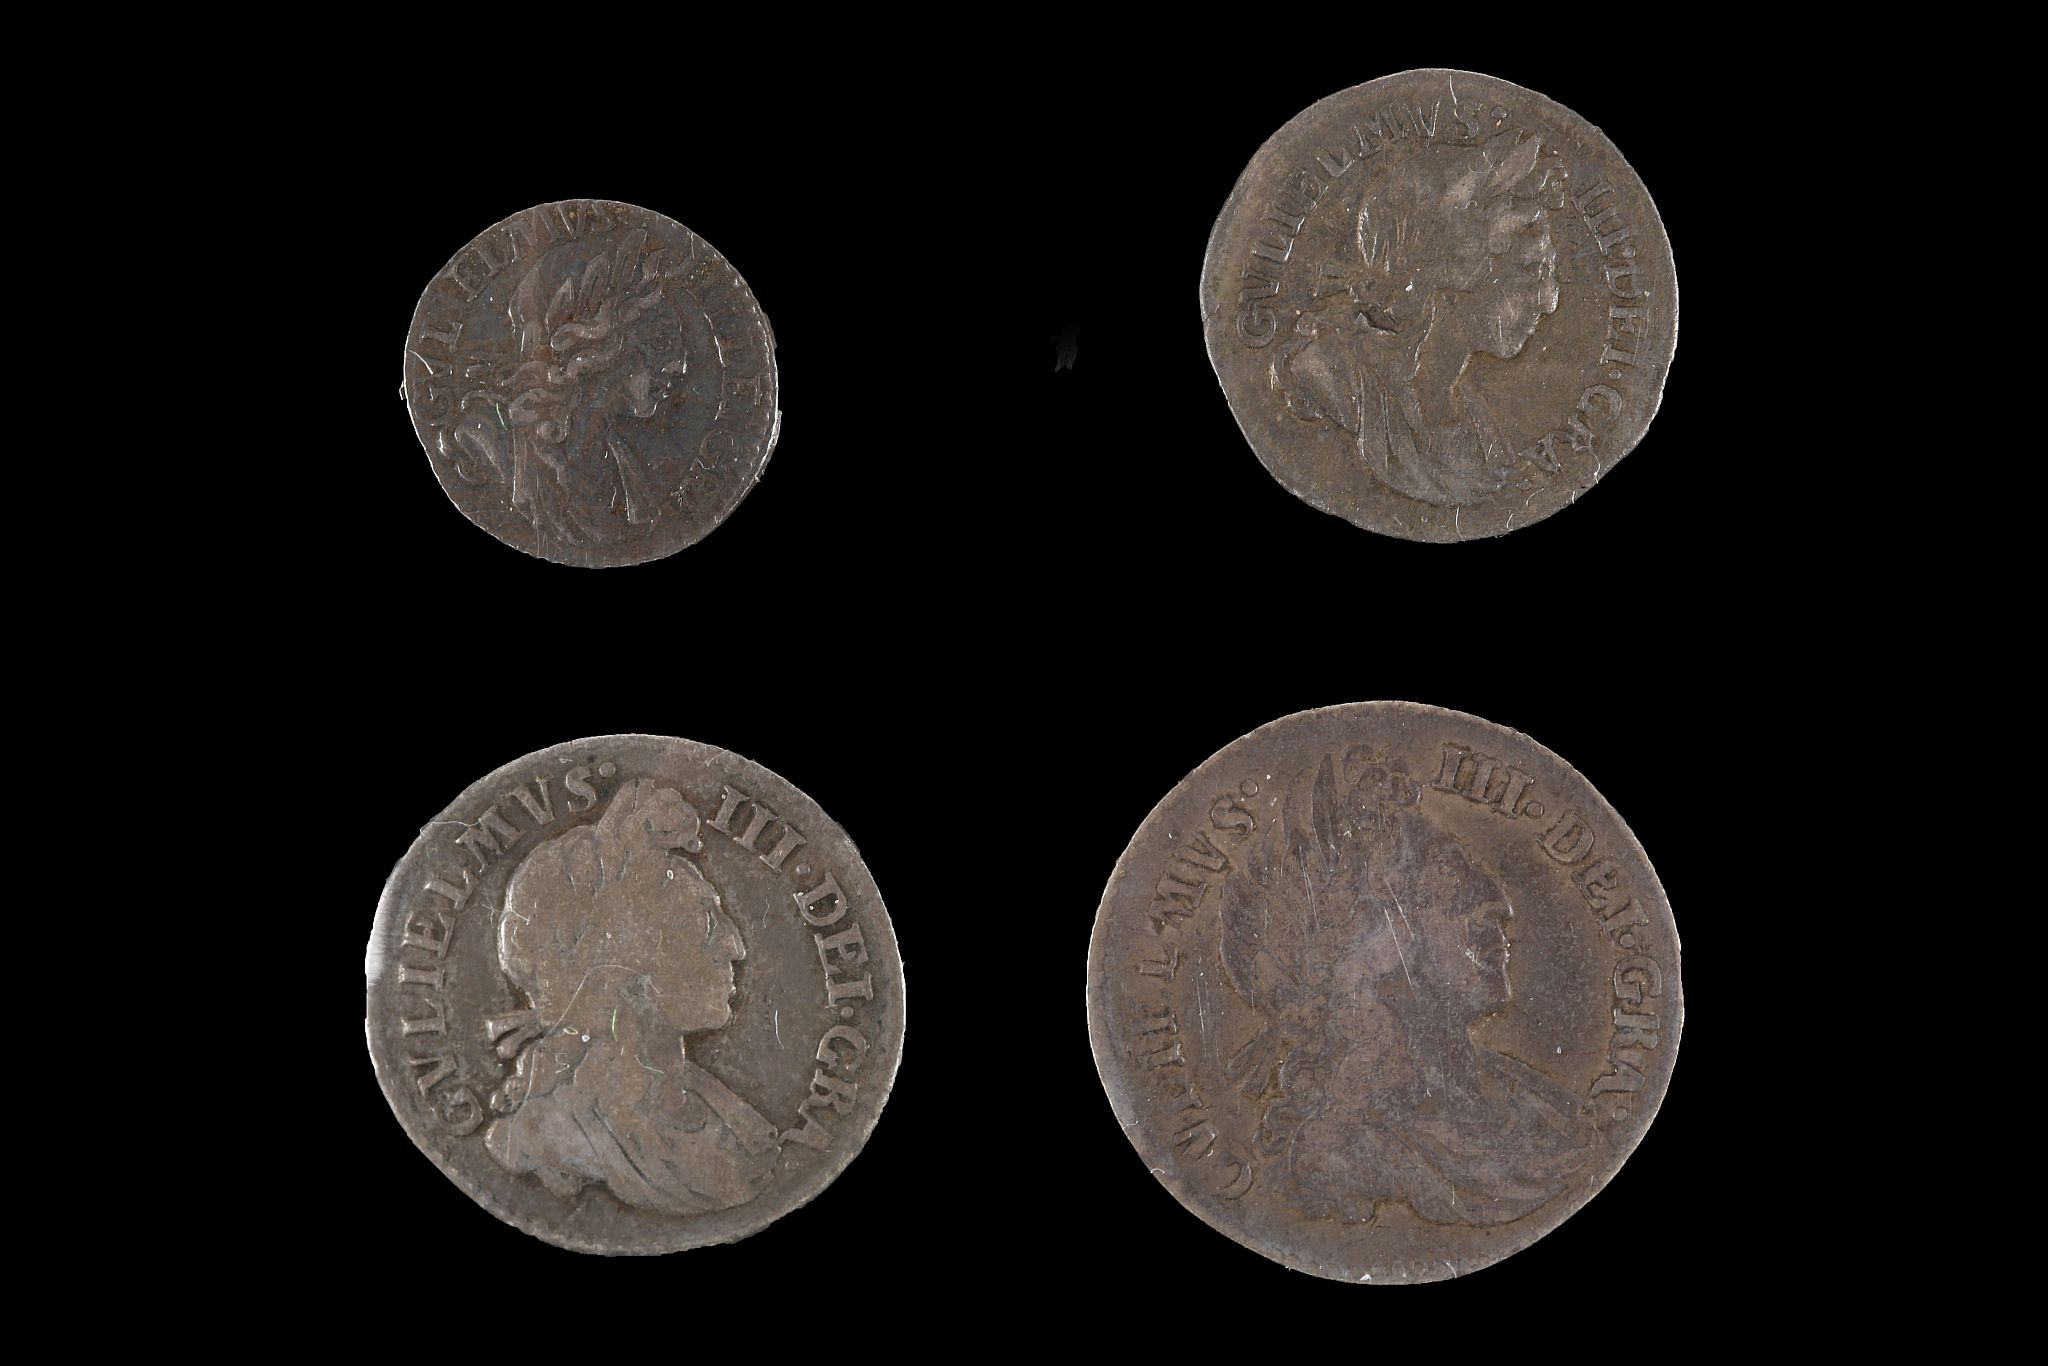 William III 1701, maundy set of four coins, laureate bust right / values in crowned Arabic numerals, - Image 2 of 2